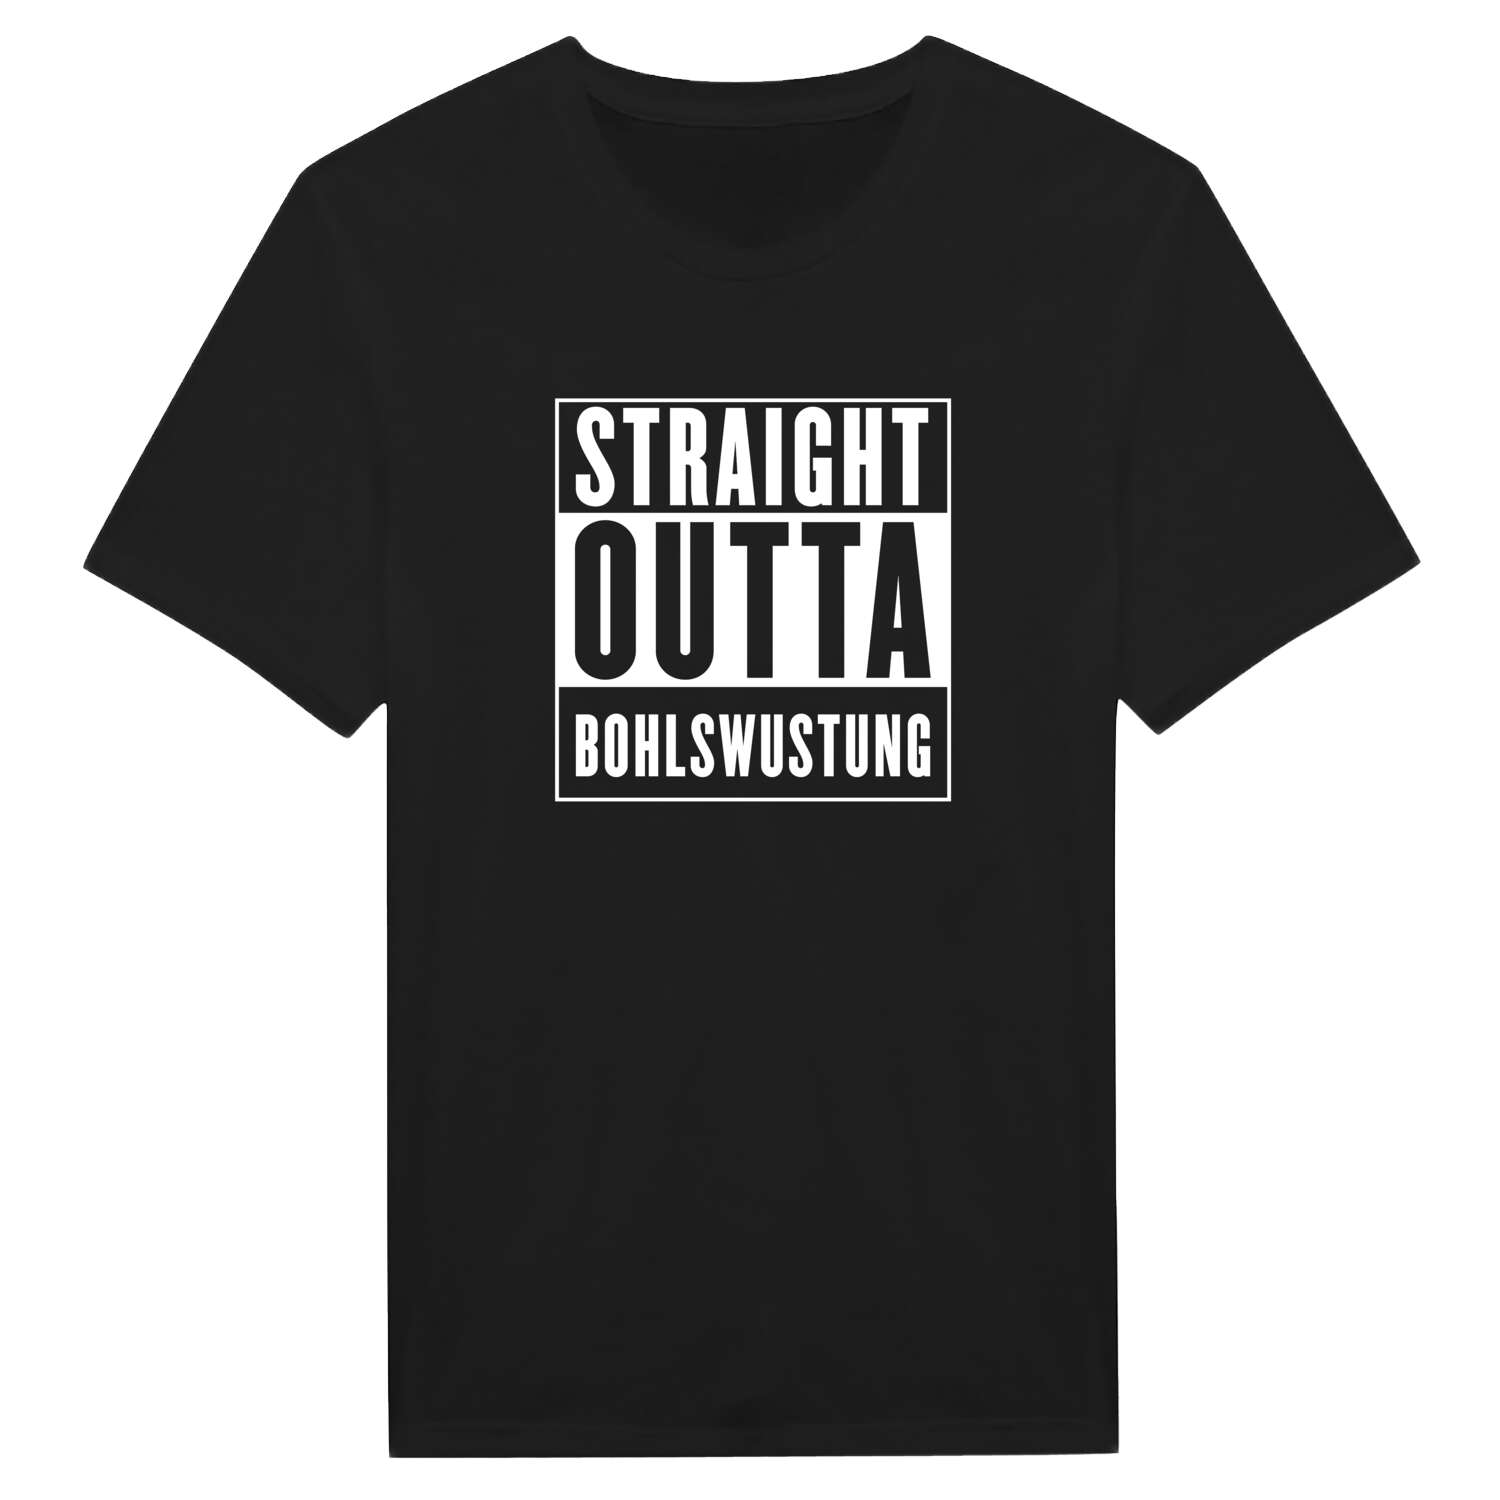 Bohlswustung T-Shirt »Straight Outta«